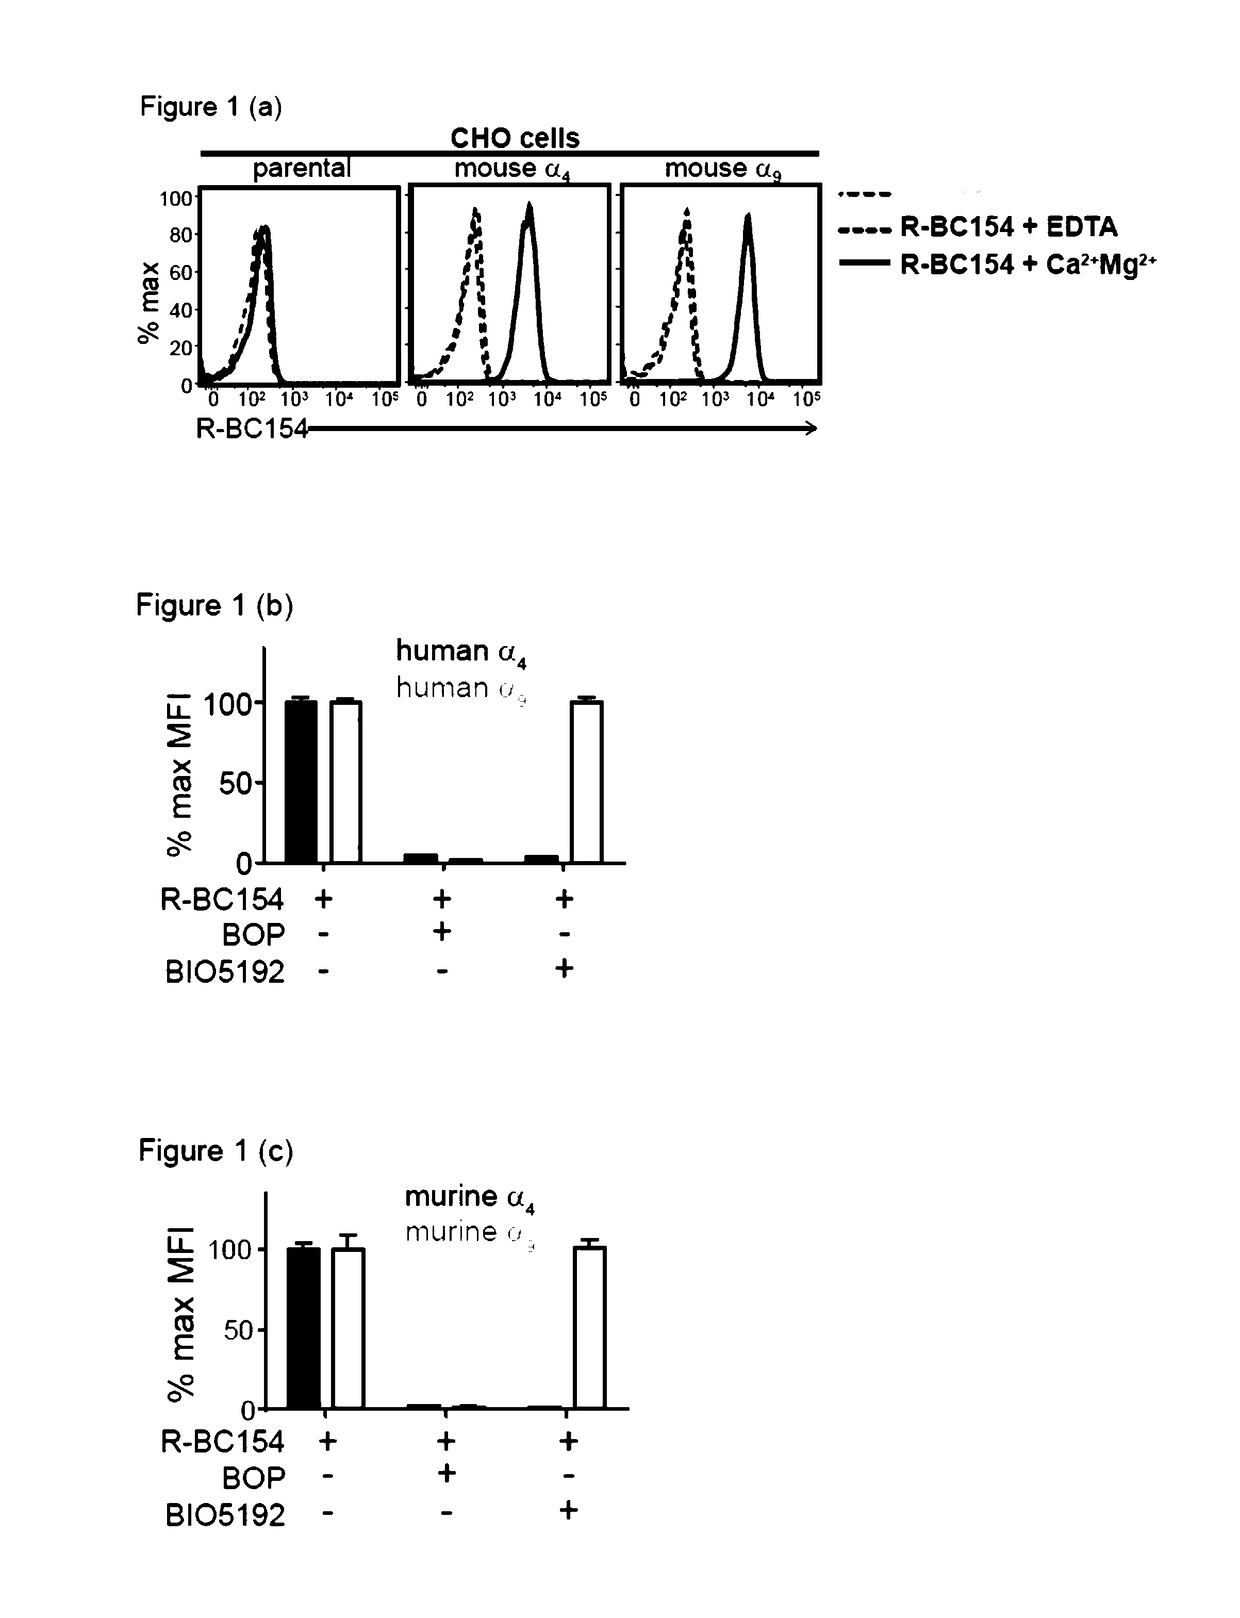 Dislodgement and release of hsc using alpha 9 integrin antagonist and cxcr4 antagonist